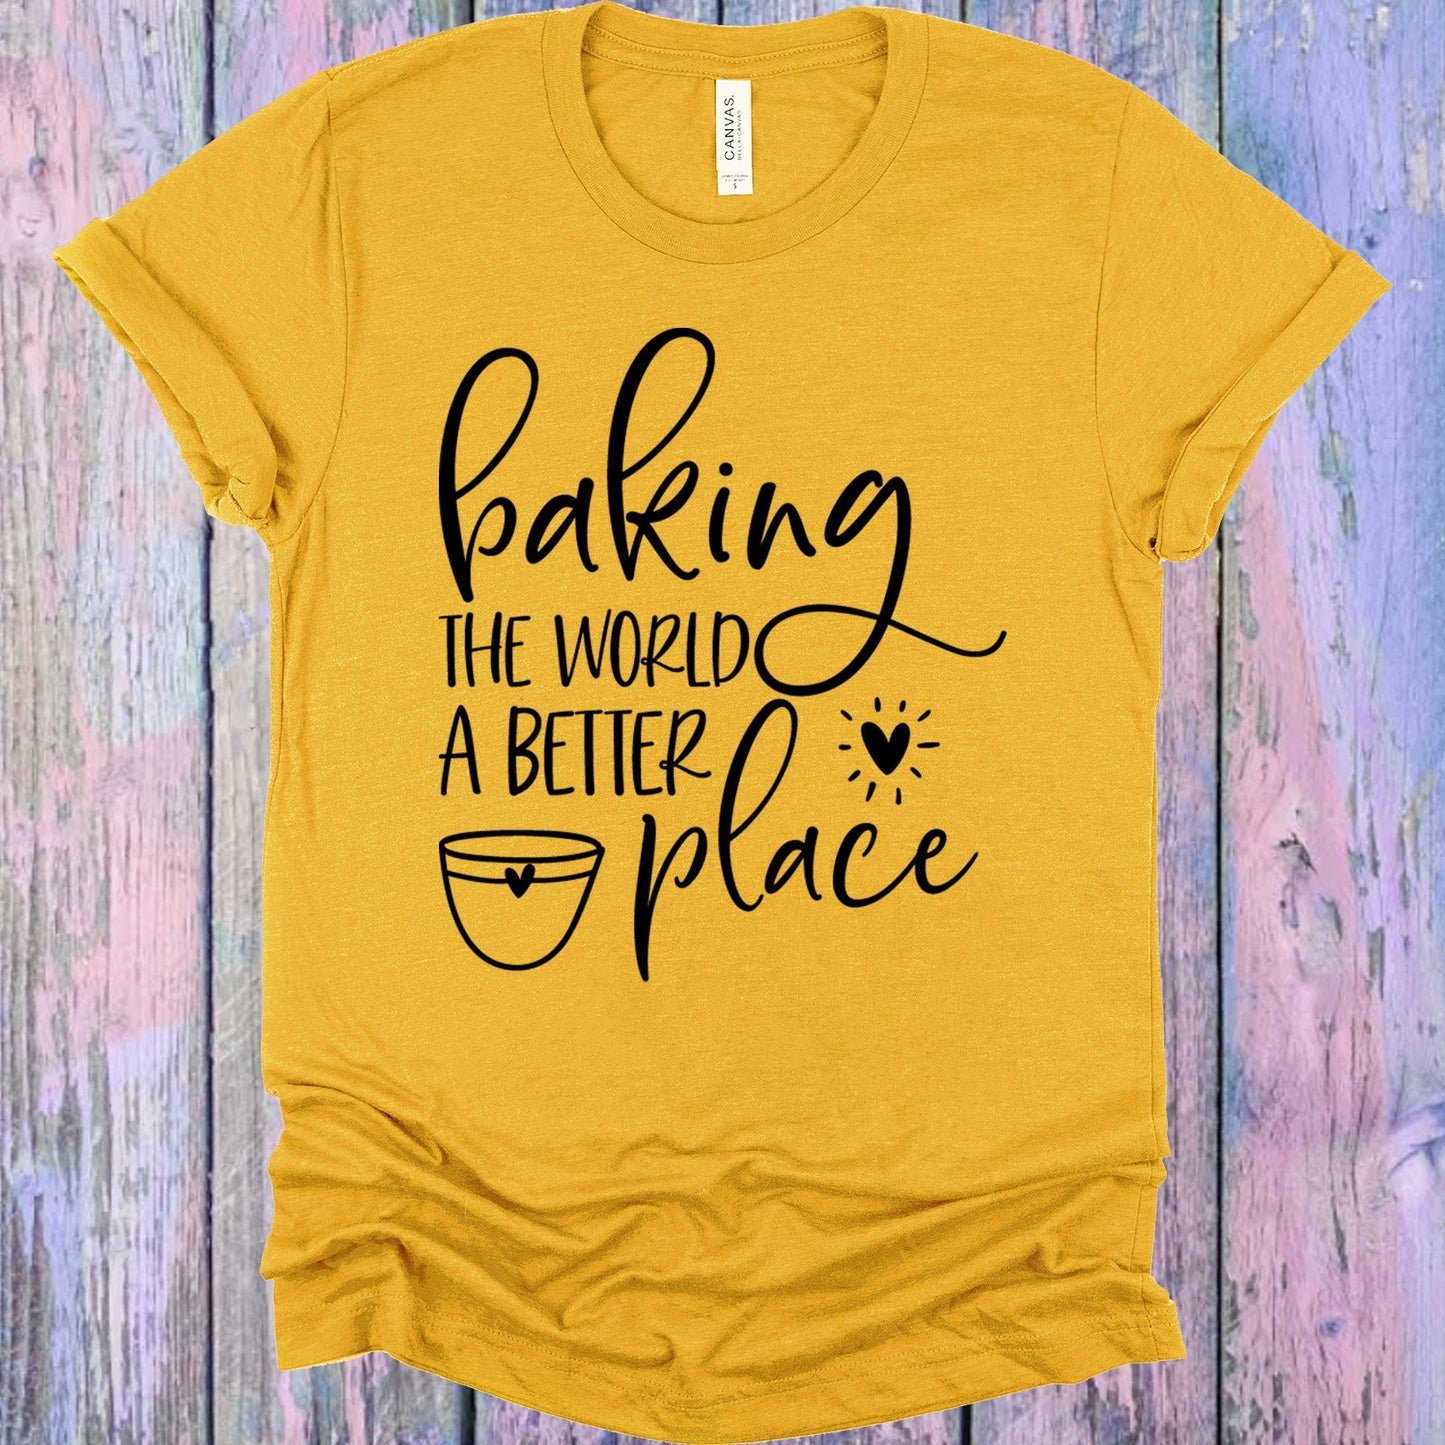 Baking The World A Better Place Graphic Tee Graphic Tee